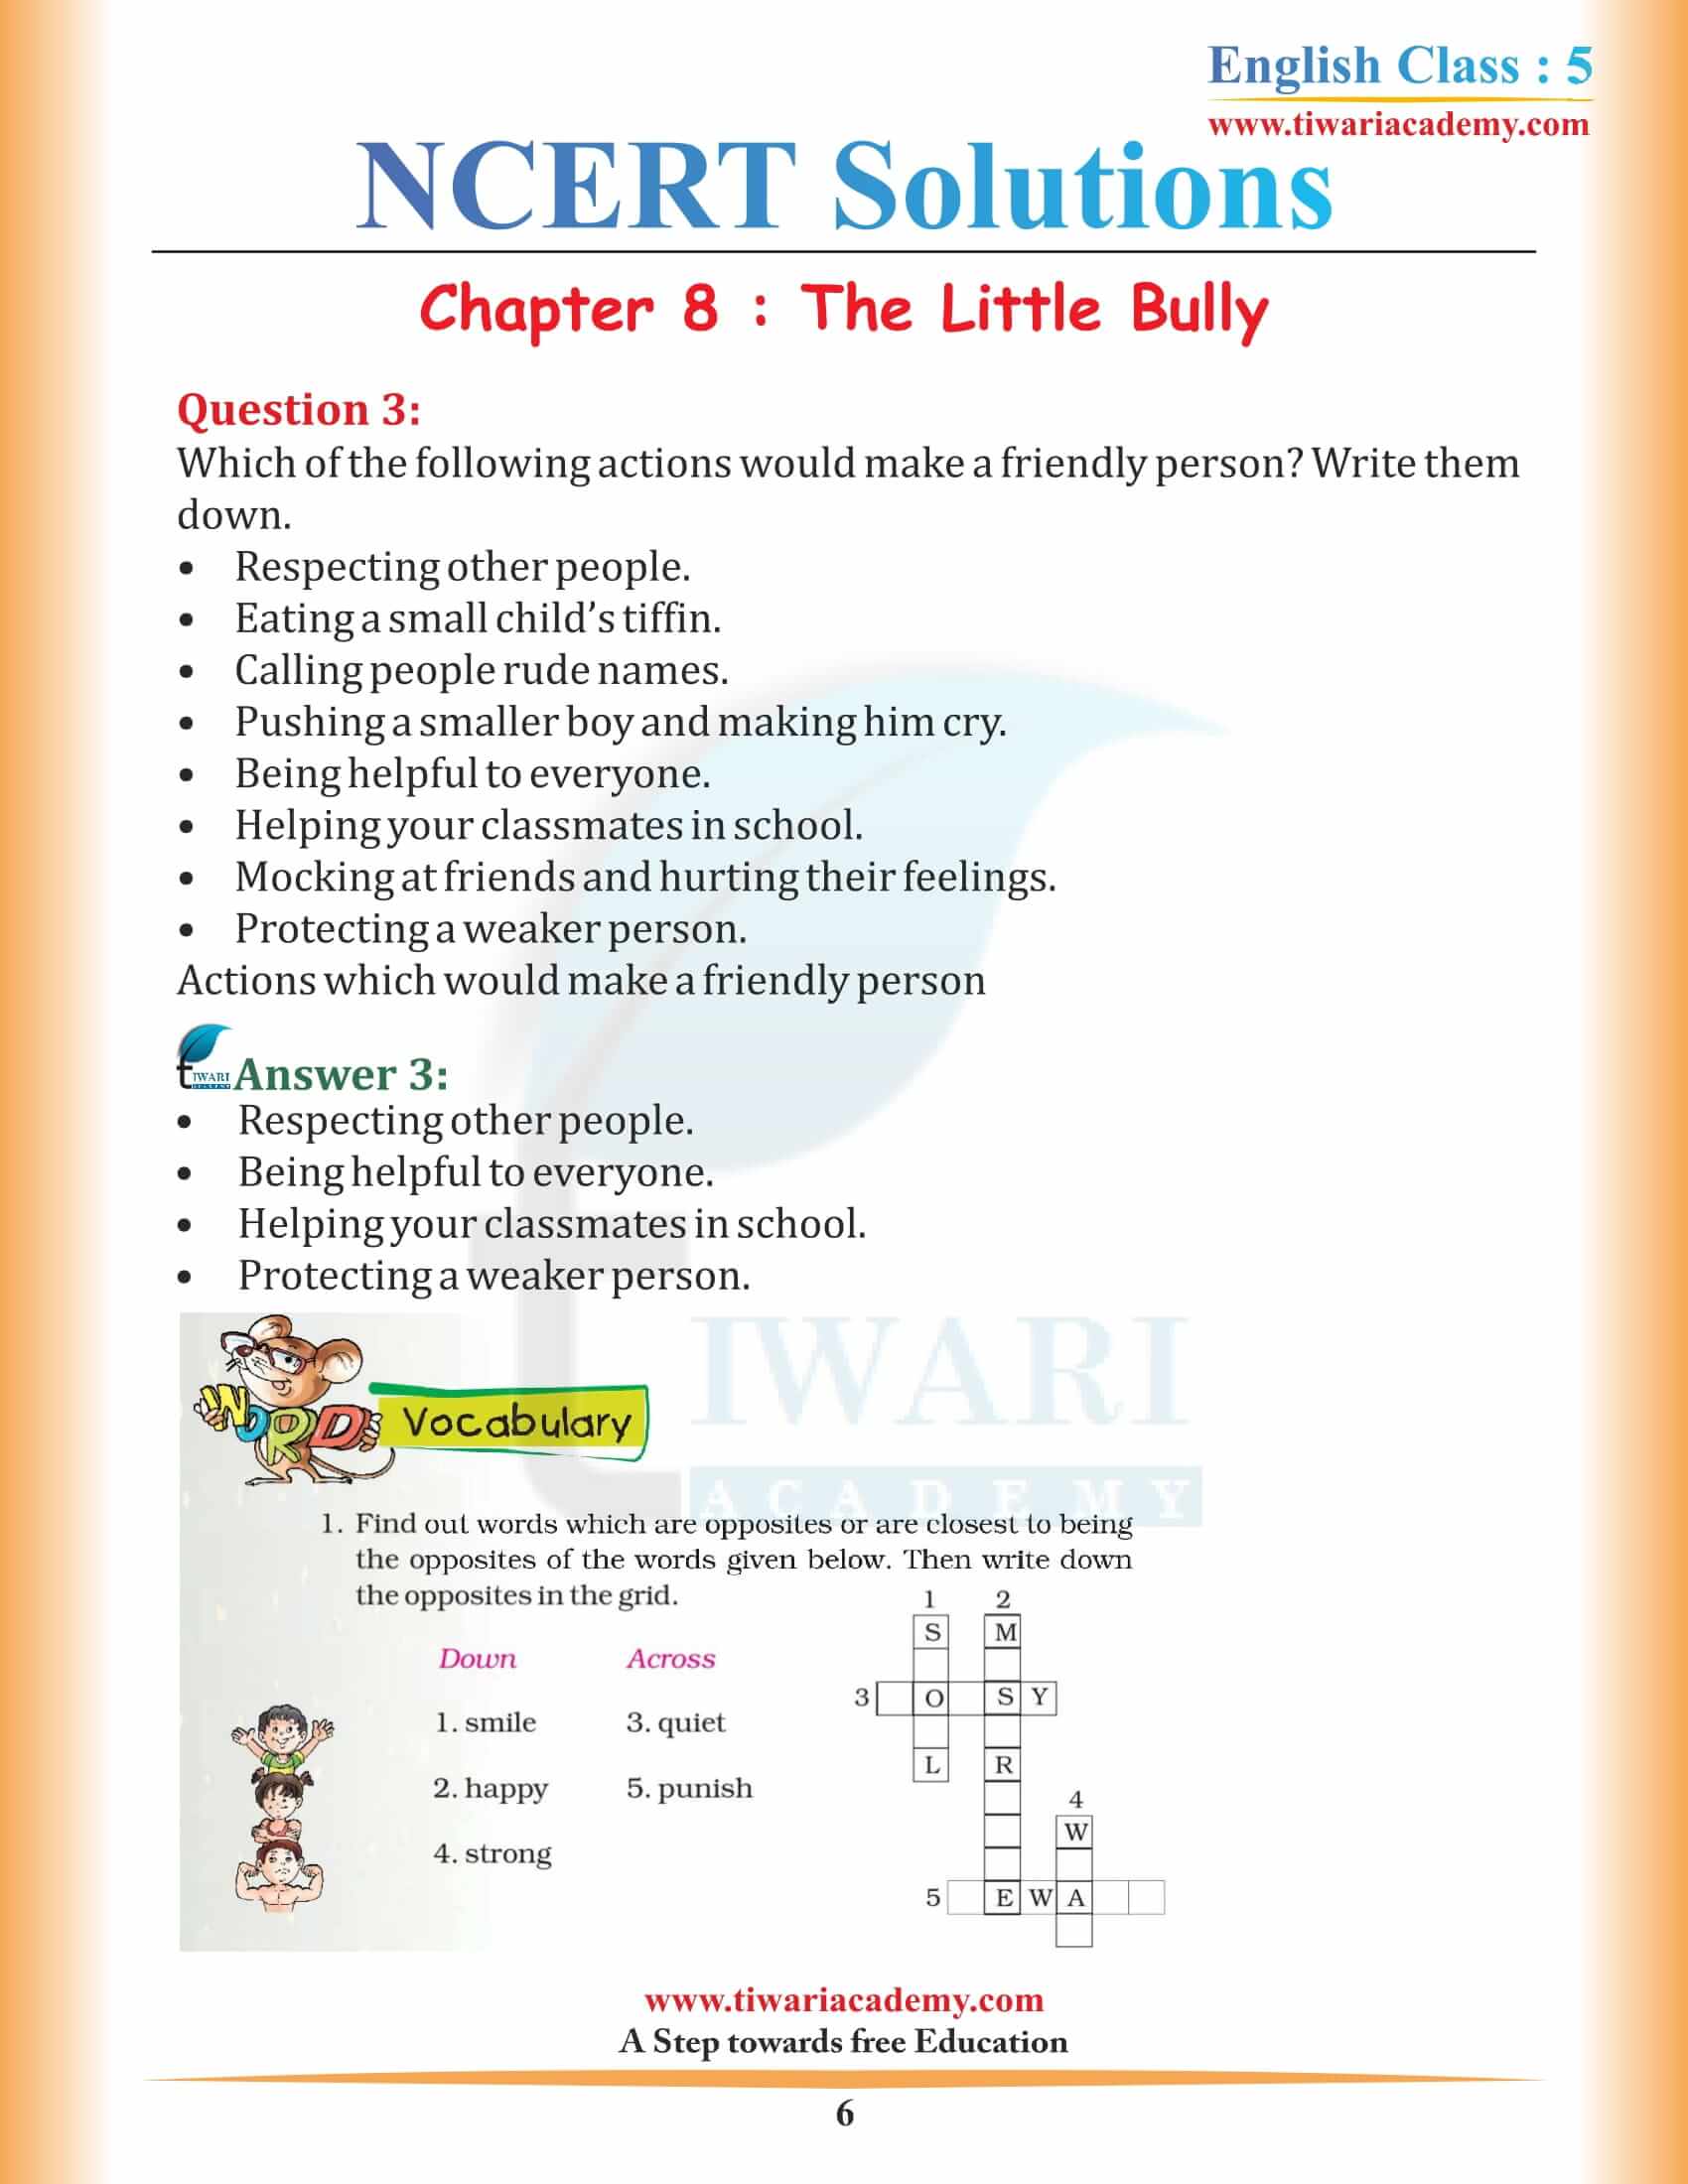 NCERT Solutions for Class 5 English Chapter 8 The Little Bully